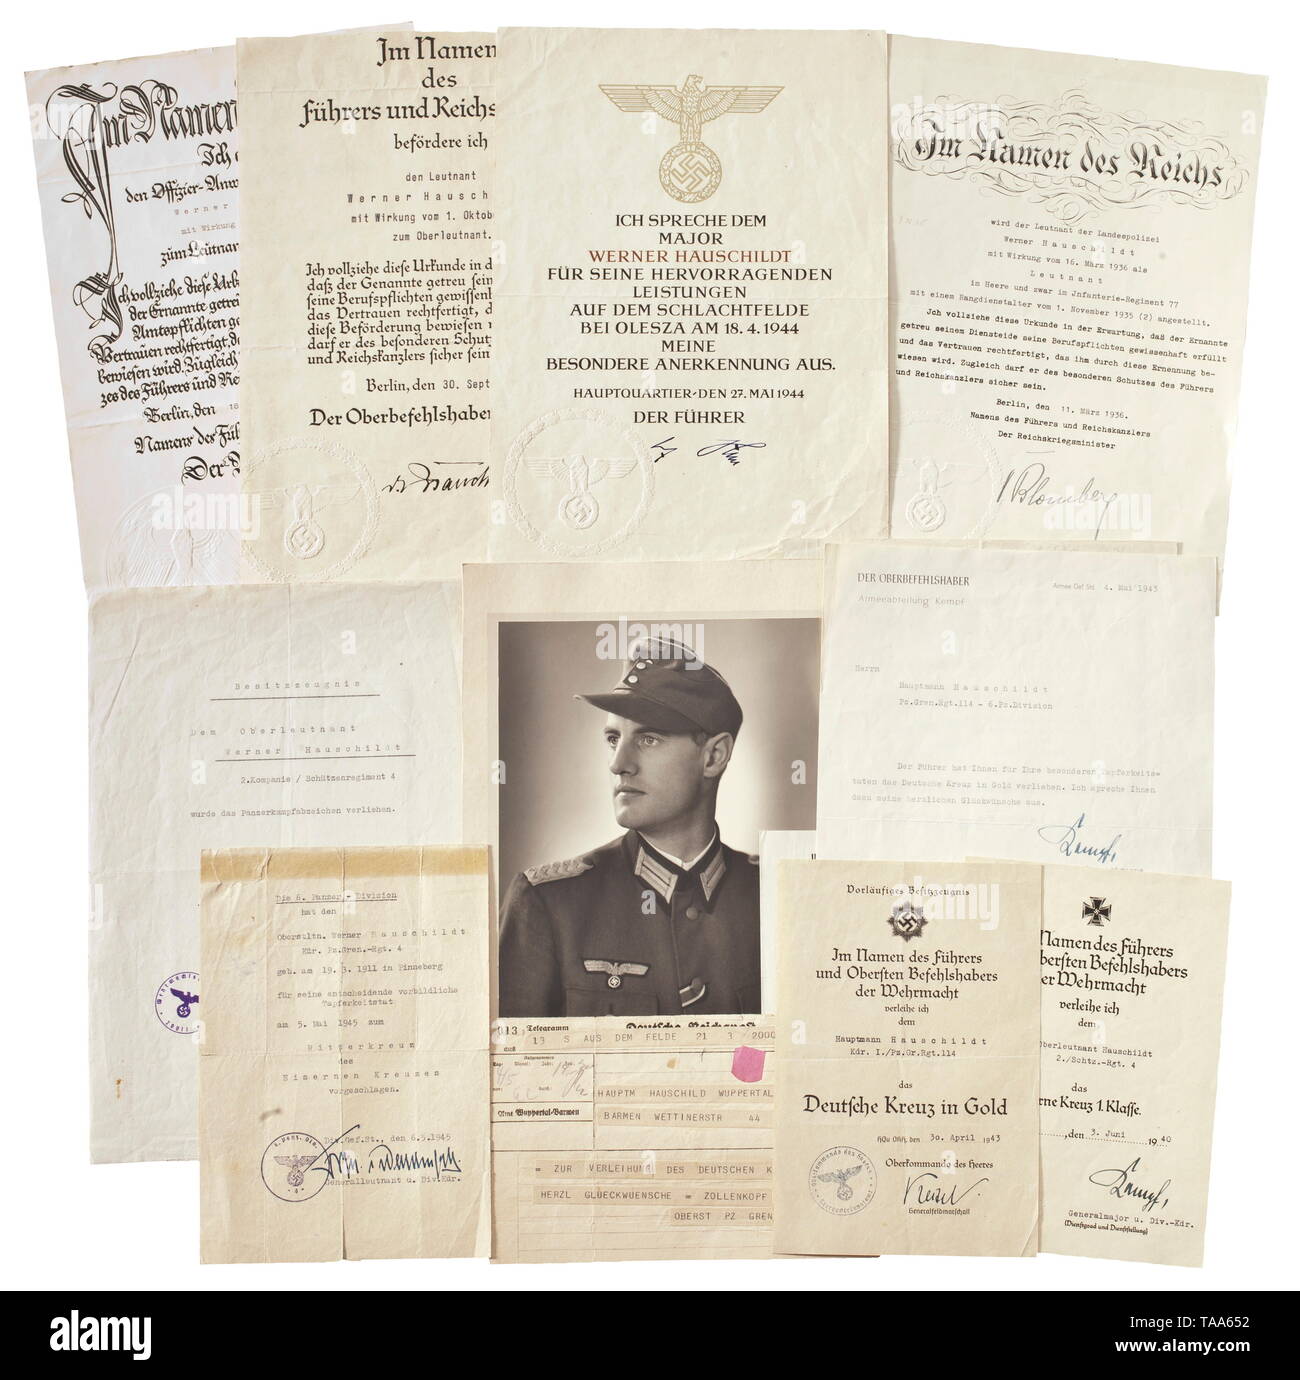 Documents and photos of Oberstleutnant Werner Hauschildt, commander of Panzer Grenadier Regiment '4' in 6th Panzer Division Documents: Commendation Certificate for Outstanding Services on the Battlefield of 'Olesha' dated 27 May 1944 with original signature of Adolf Hitler, dimensions 21 x 29.5 cm. Recommendation for the Knight's Cross of the Iron Cross dated 6 May 1945 with original signature of General Freiherr von Waldenfeld. Preliminary possession document for the German Cross in Gold dated 30 April 1943, along with various best wishes letters and telegrams. Award docum, Editorial-Use-Only Stock Photo